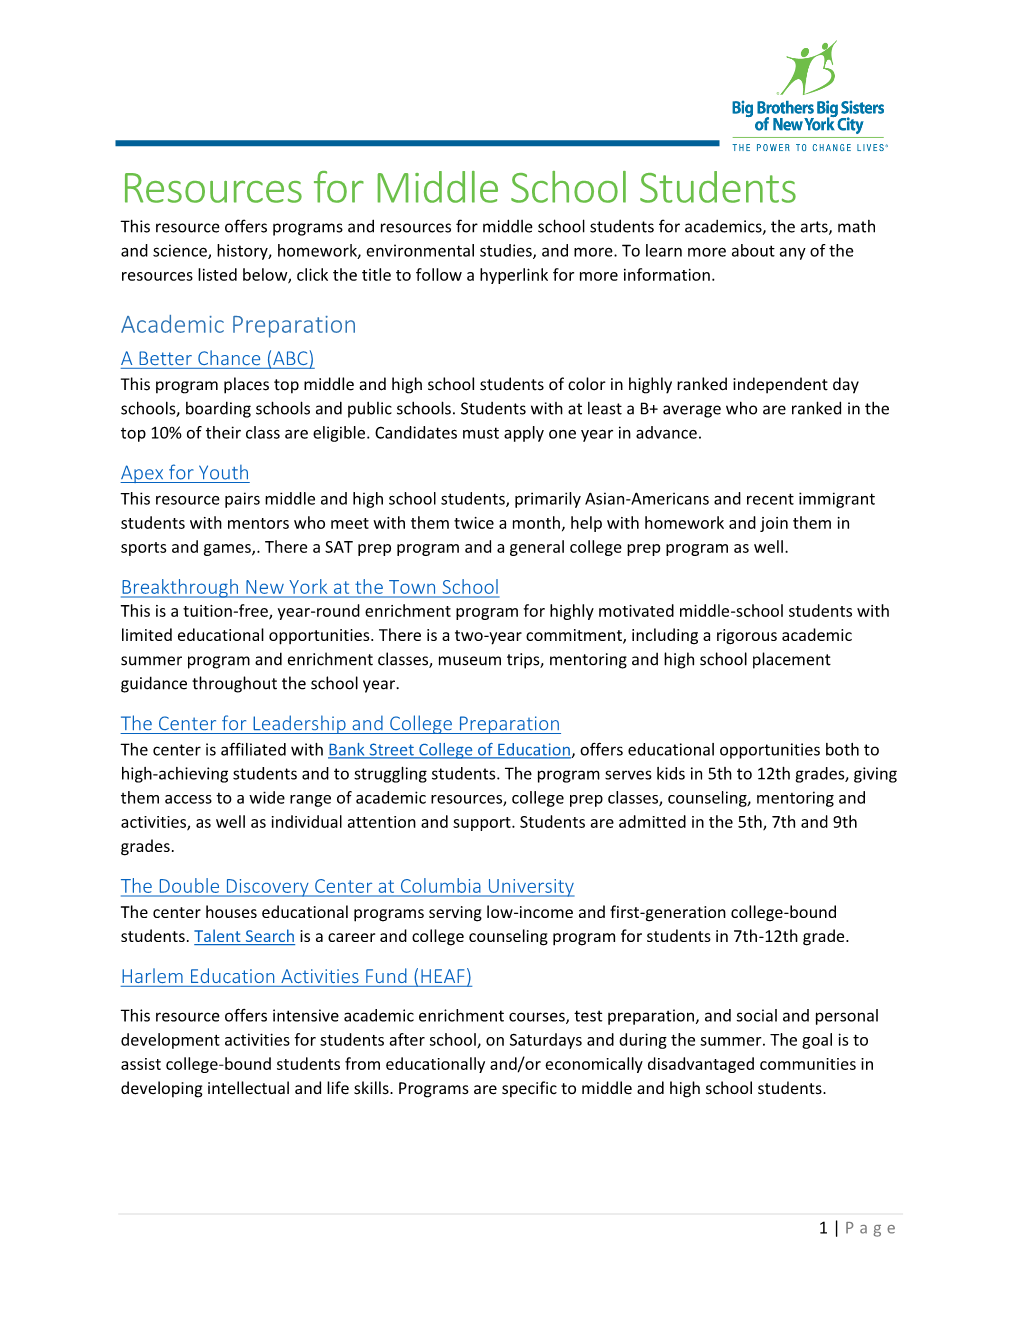 Resources for Middle School Students